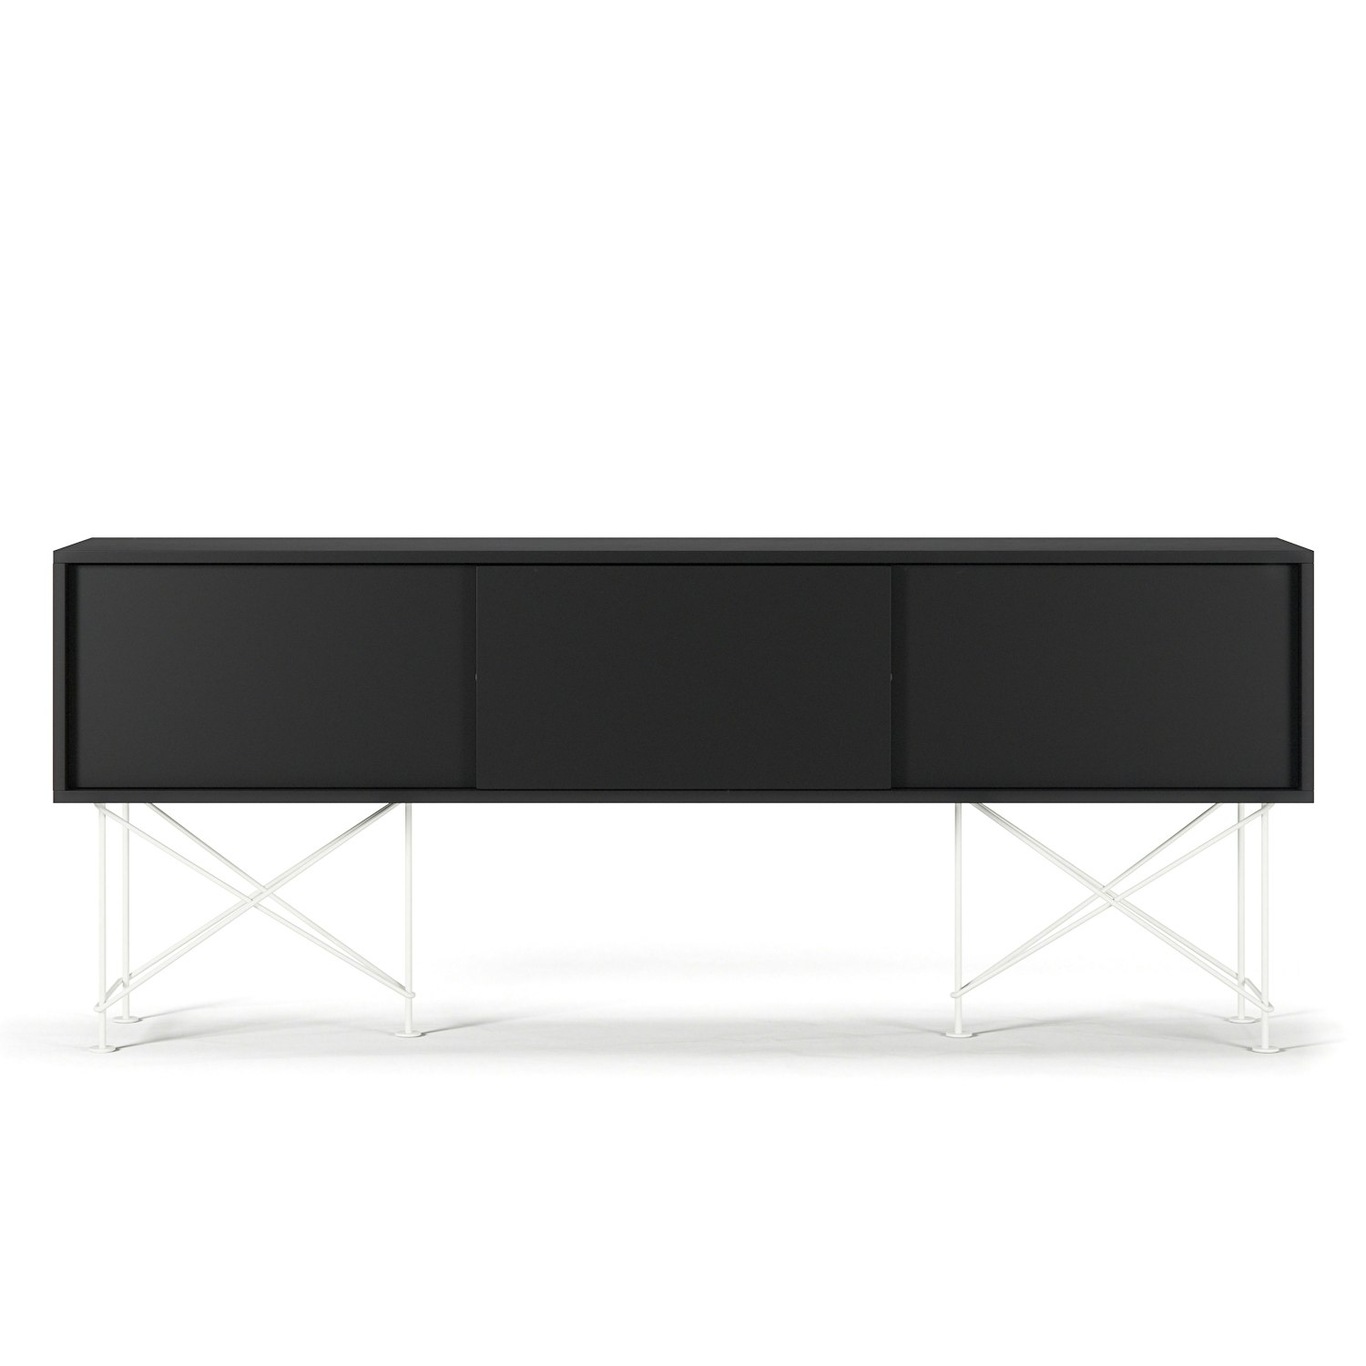 Vogue Media Bench With Stand 180 cm, Anthracite / White